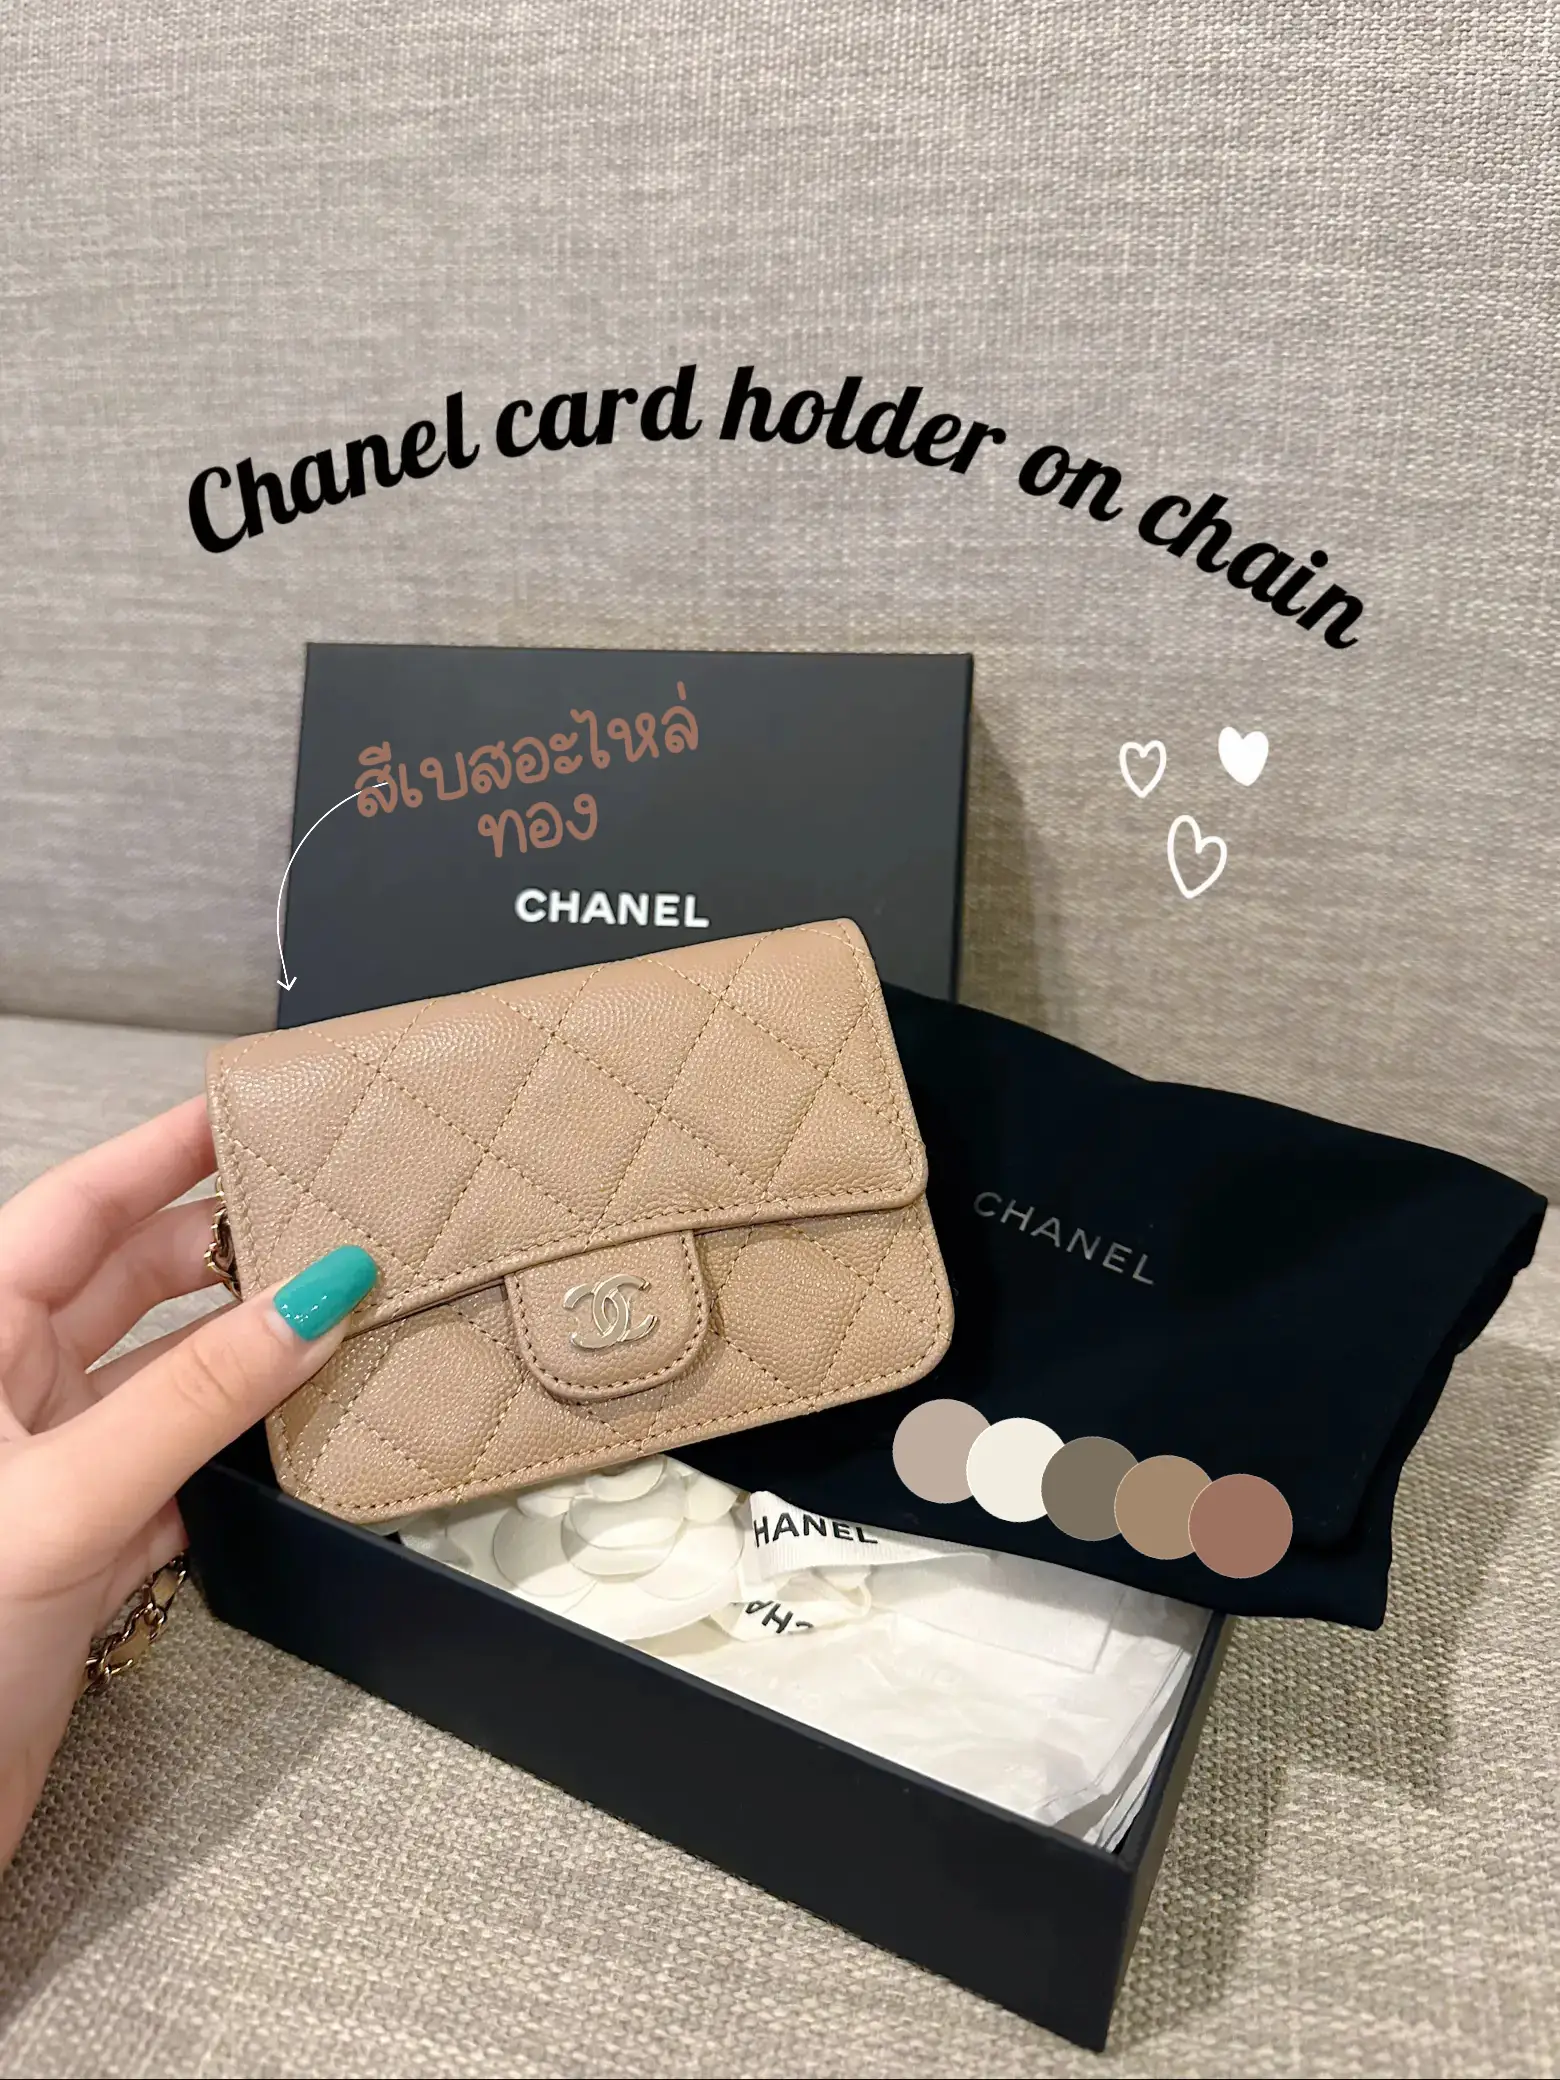 classic chanel card holder